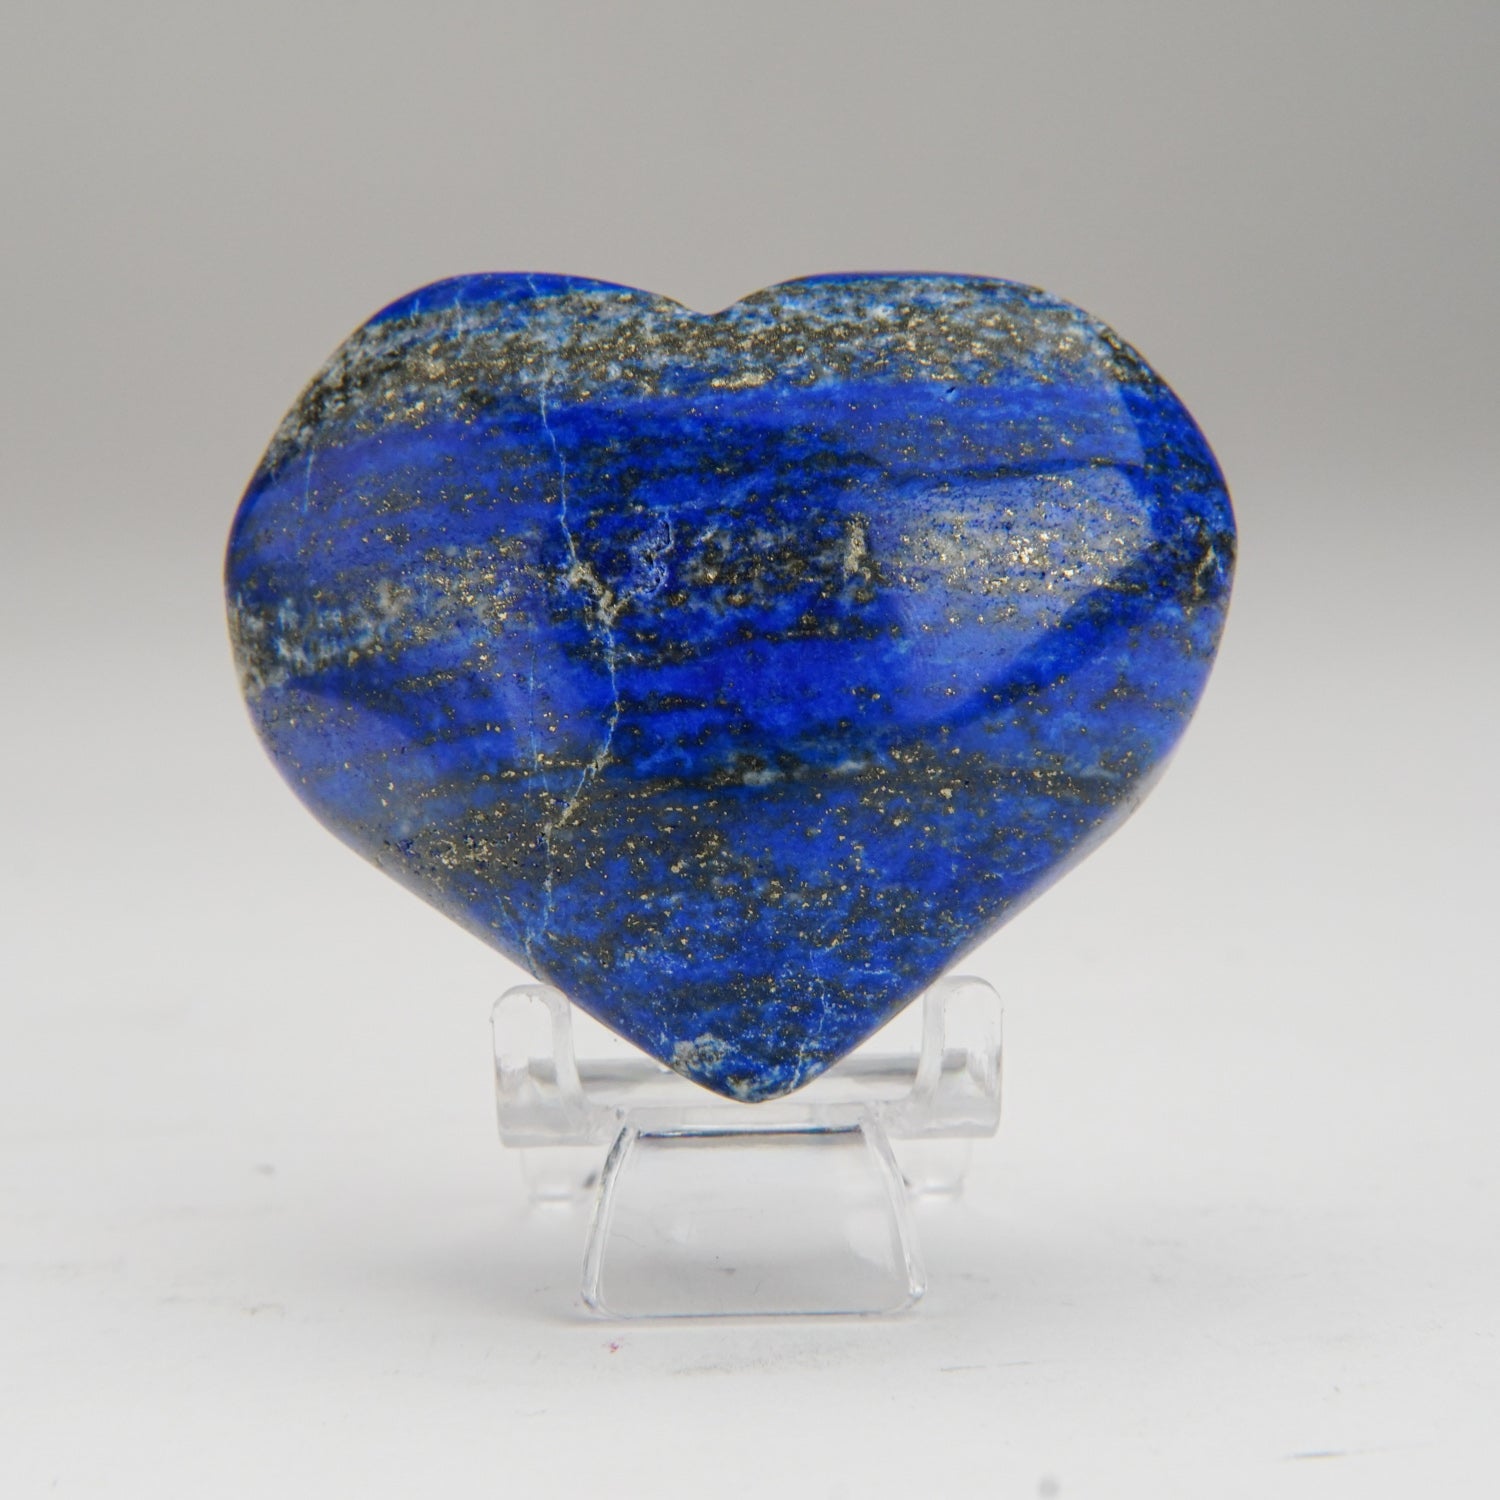 Polished Lapis Lazuli Heart from Afghanistan (20 grams)